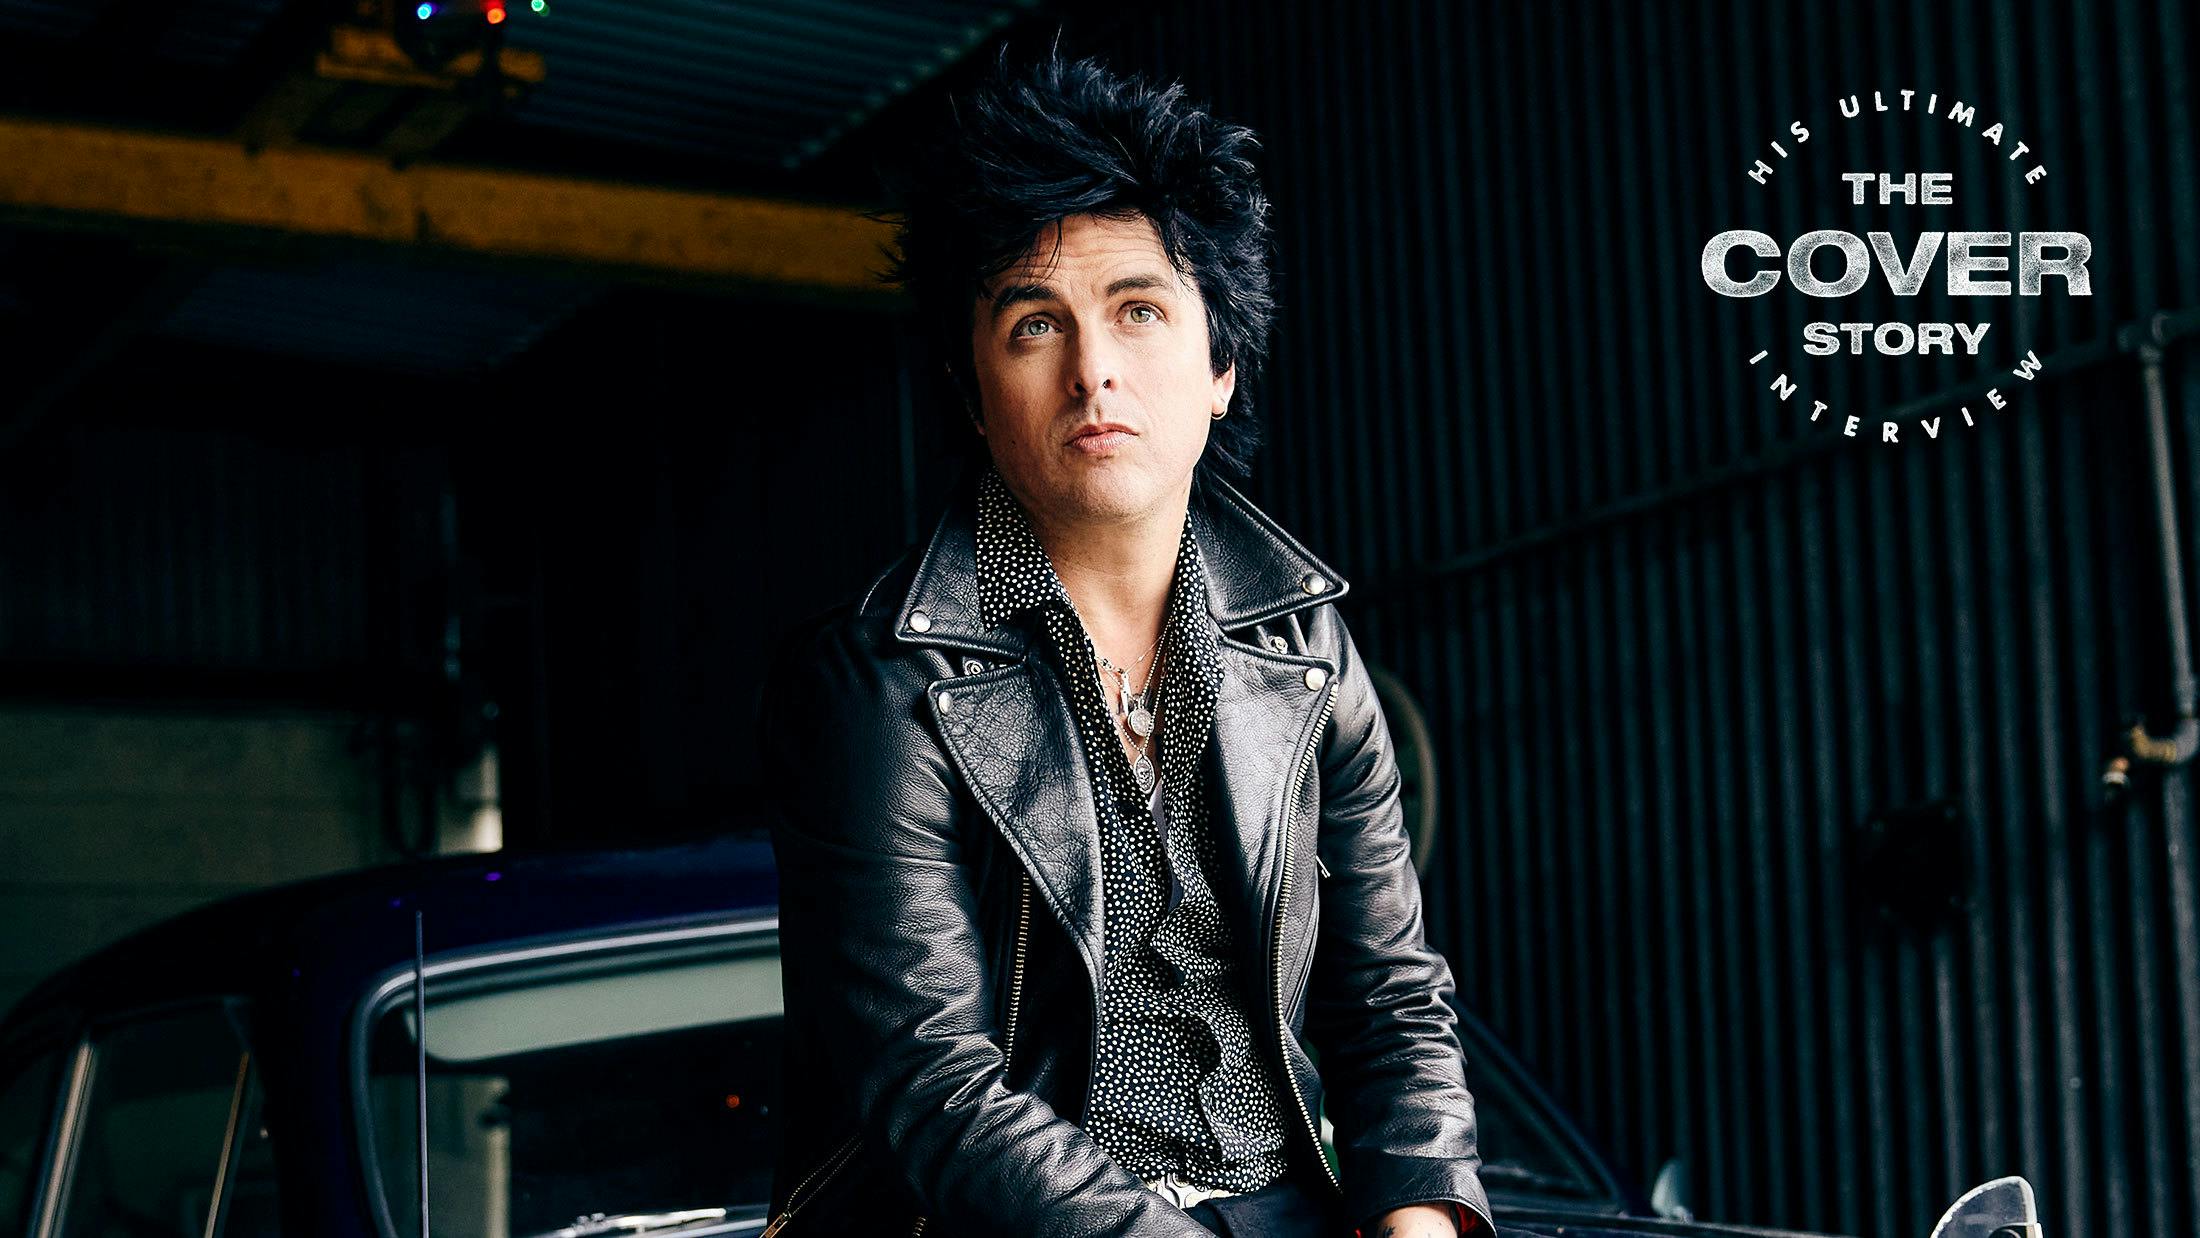 Billie Joe Armstrong: Life lessons in punk rock